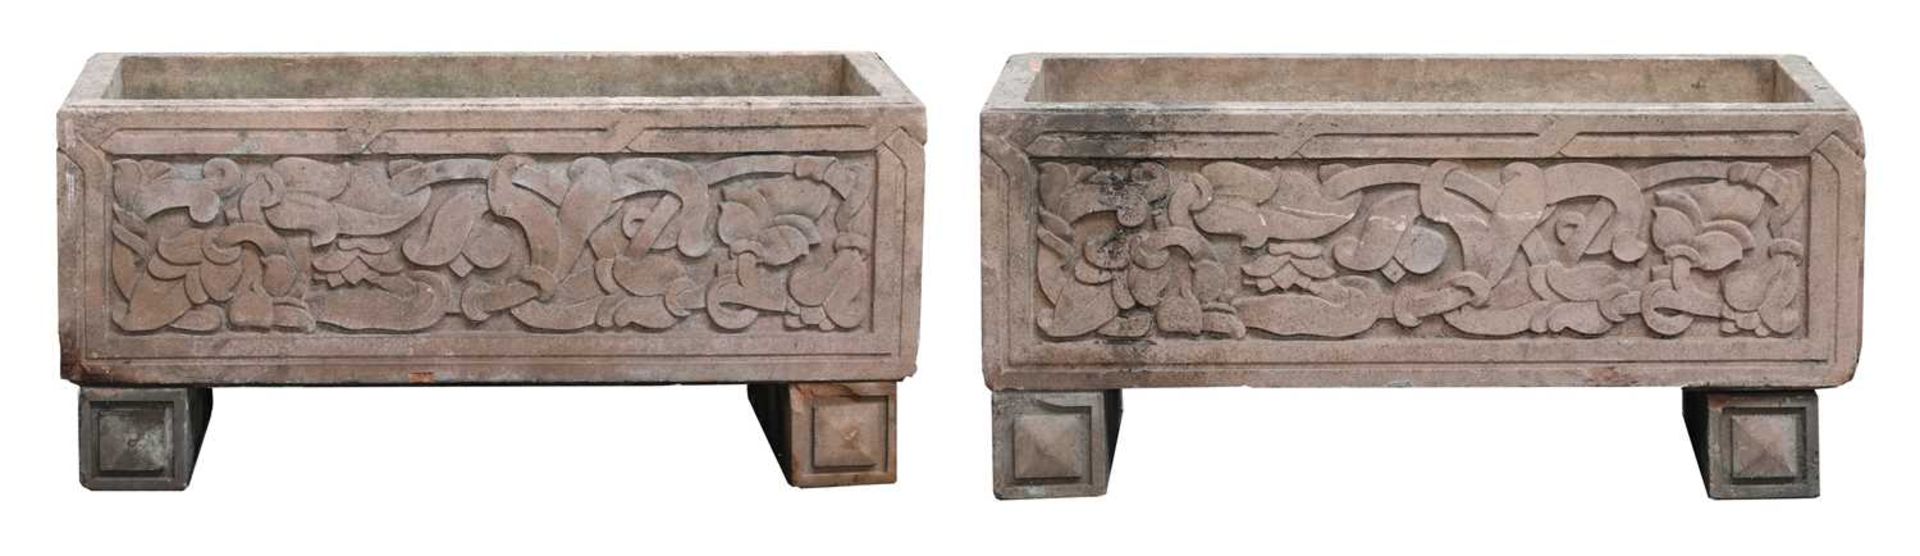 A pair of Indian sandstone garden troughs, - Image 2 of 2